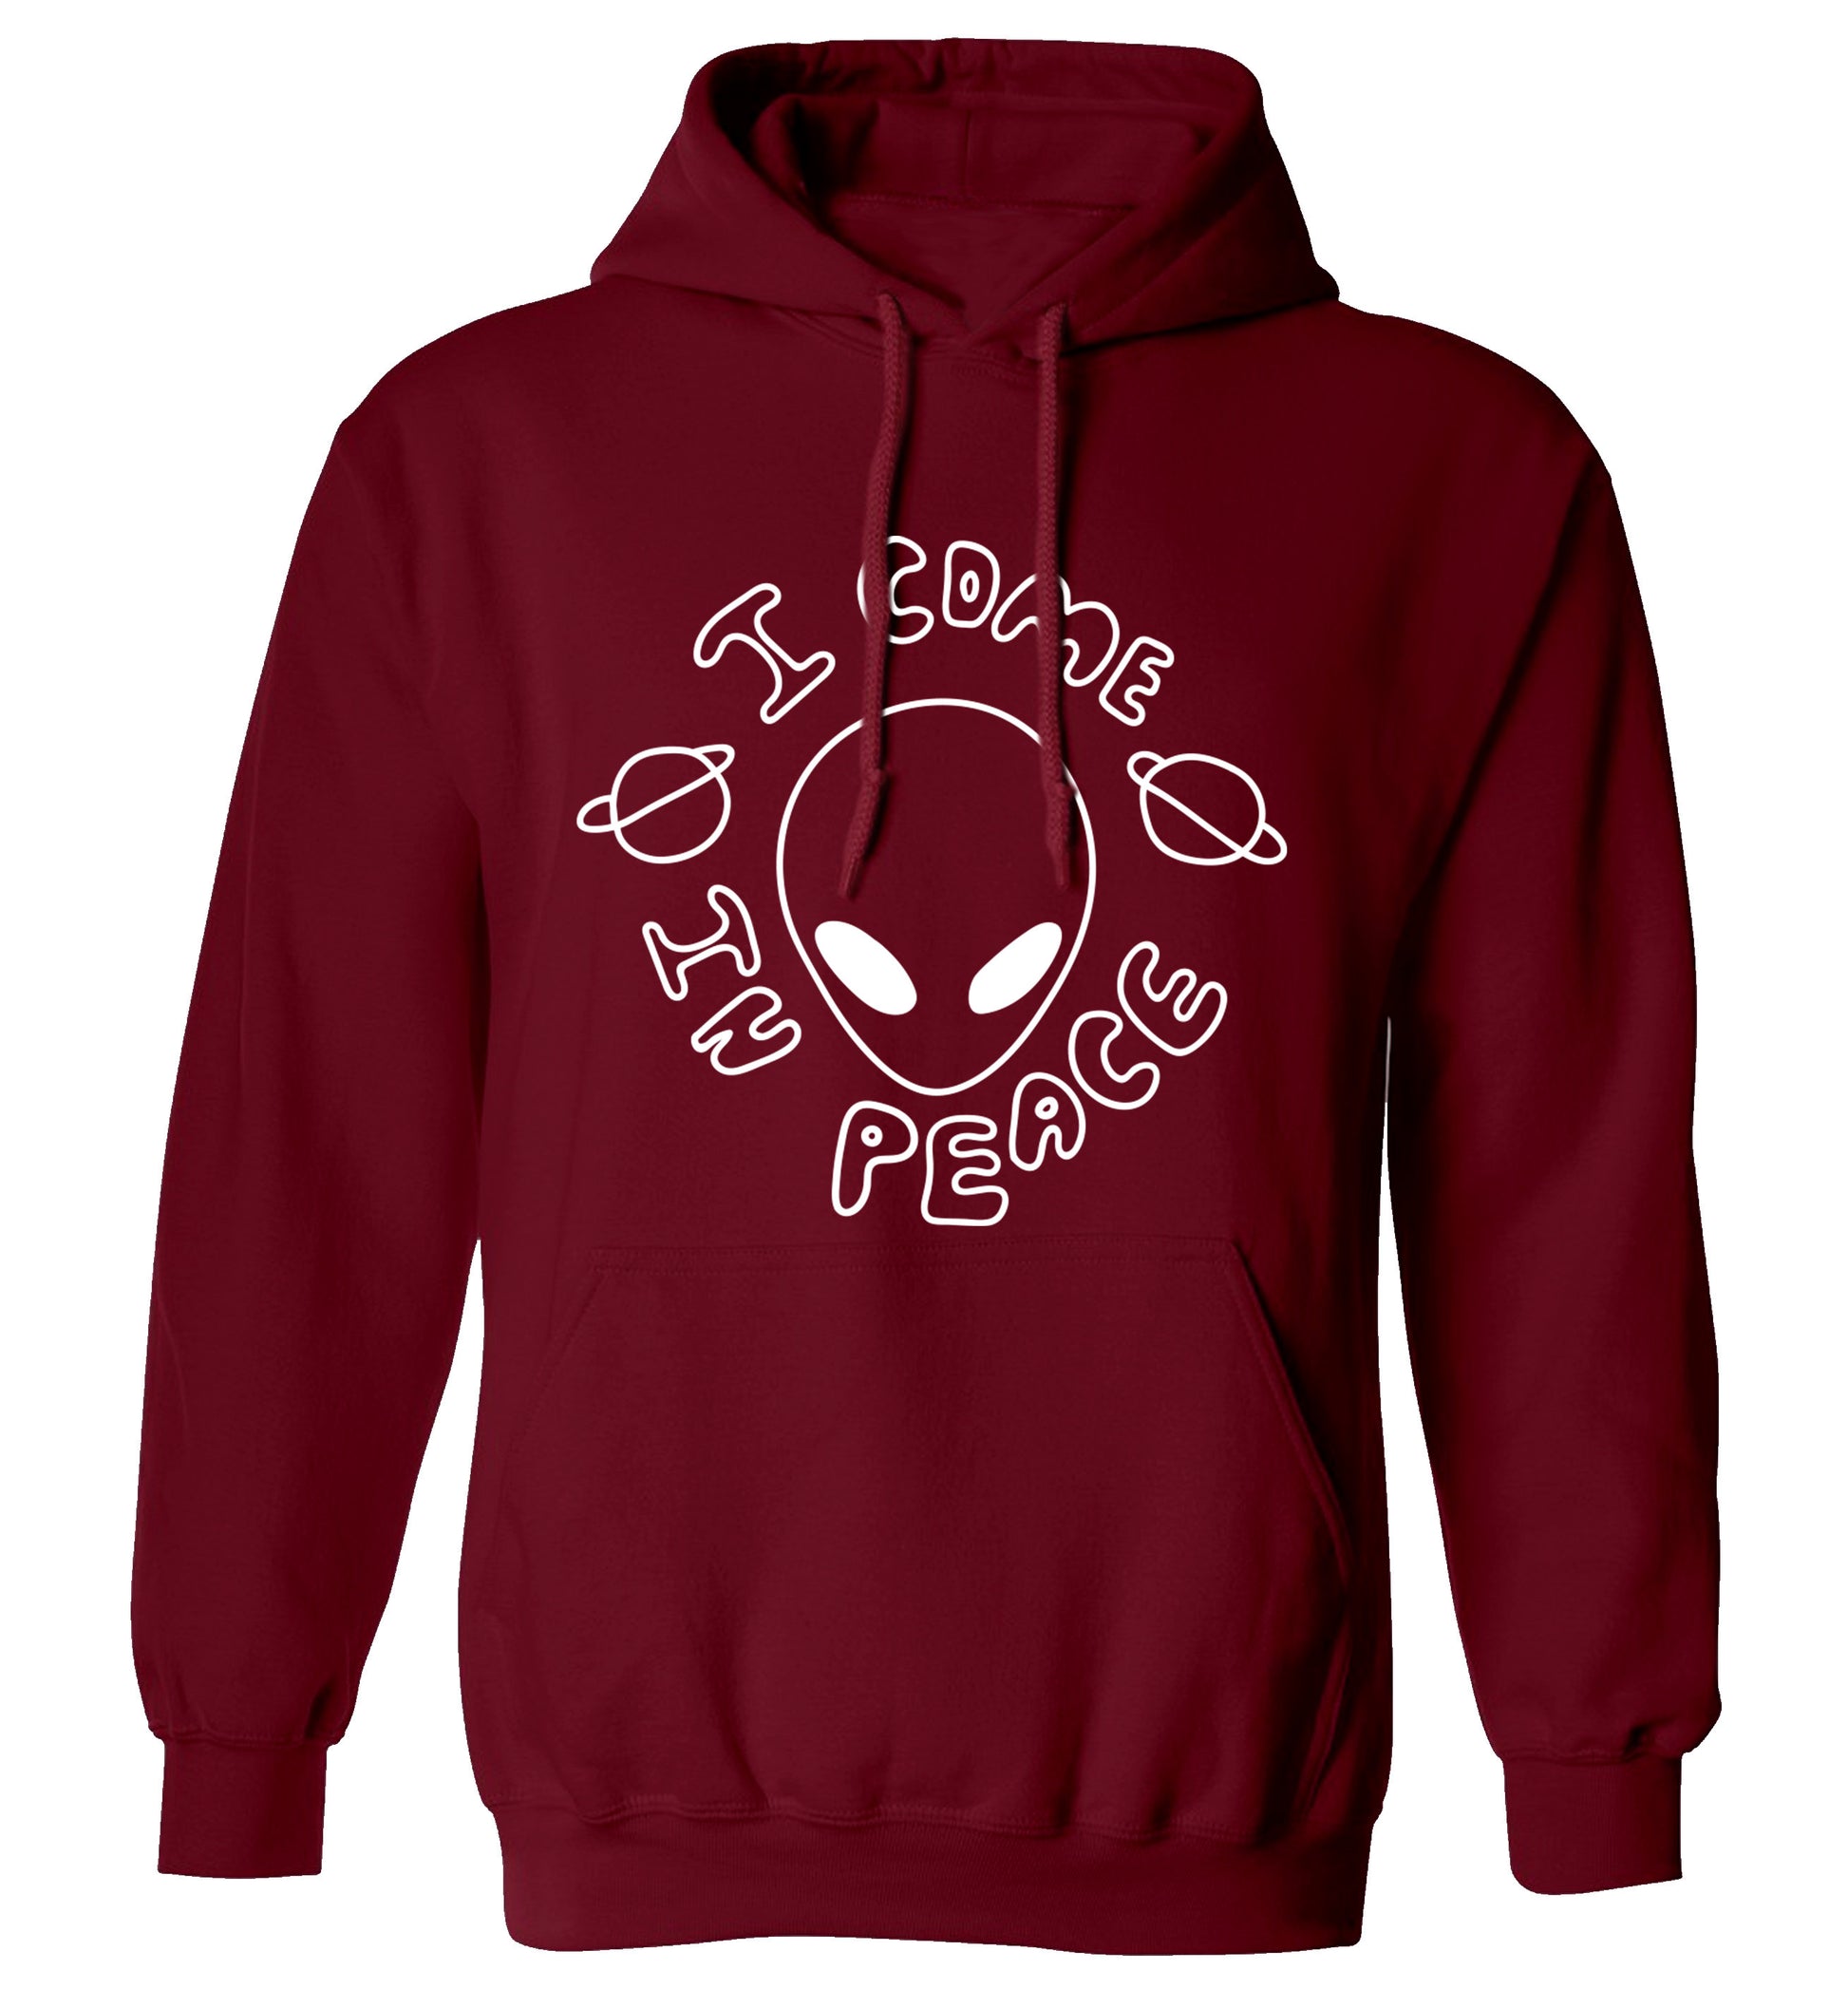 I come in peace adults unisex maroon hoodie 2XL